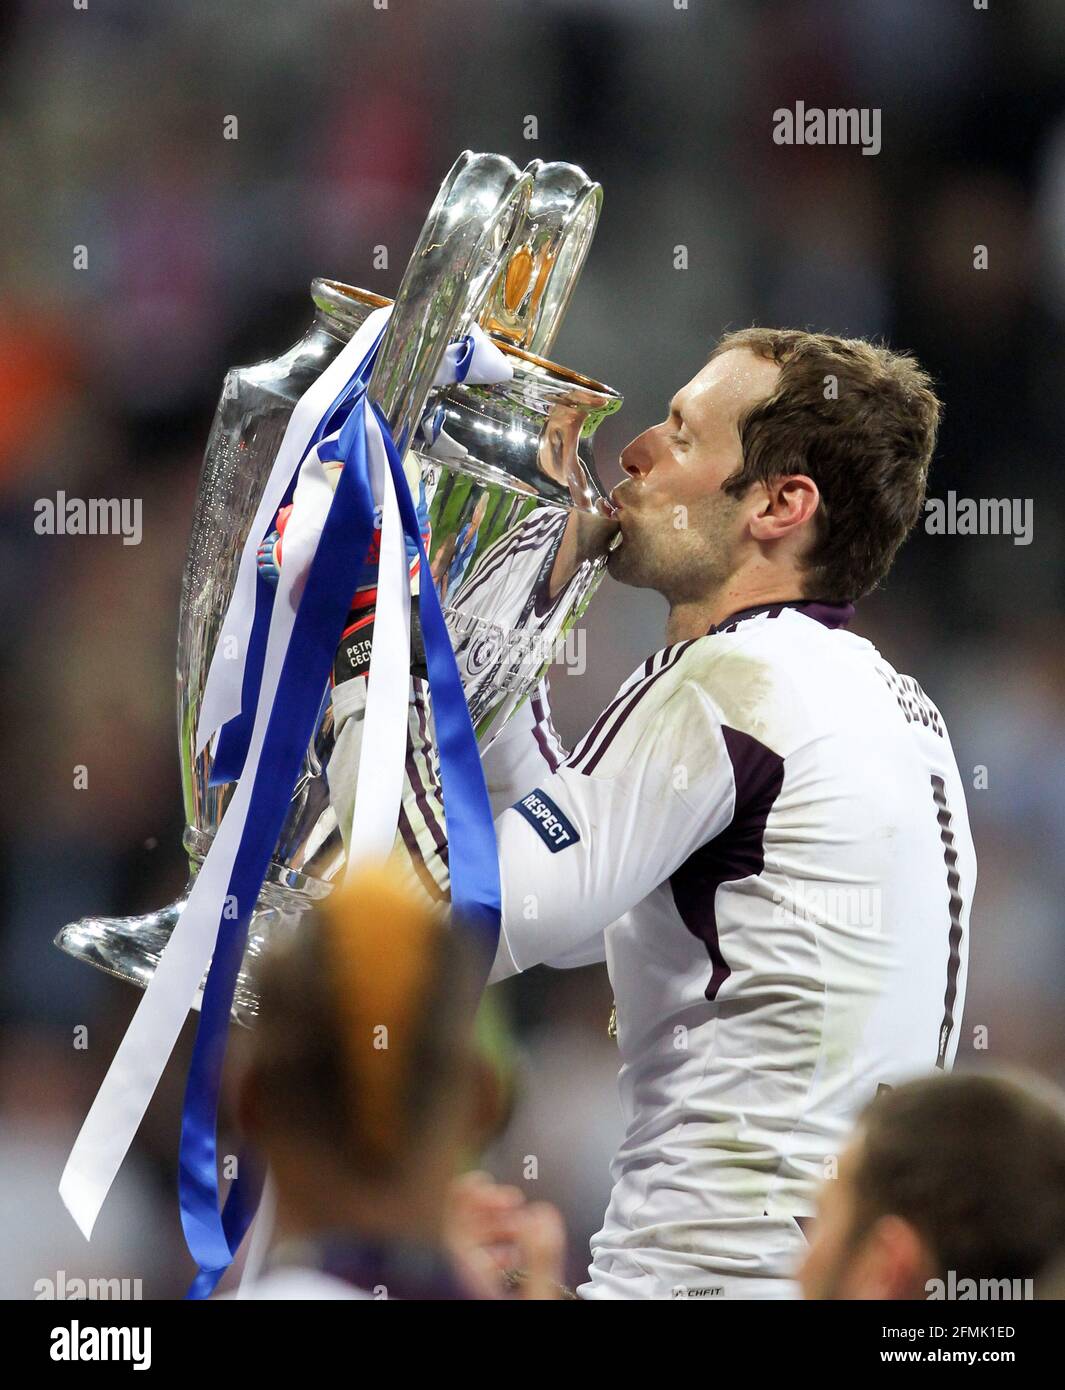 Champions League Winner FC Chelsea celebrates the victory Petr Cech with the trophy  Finale FC Chelsea - FC Bayern Muenchen 2011 / 2012 UEFA Champions league Final FC Chelsea - FC Bayern  5 : 4   Munich 19. 5. 2012 e© diebilderwelt / Alamy Stock Stock Photo